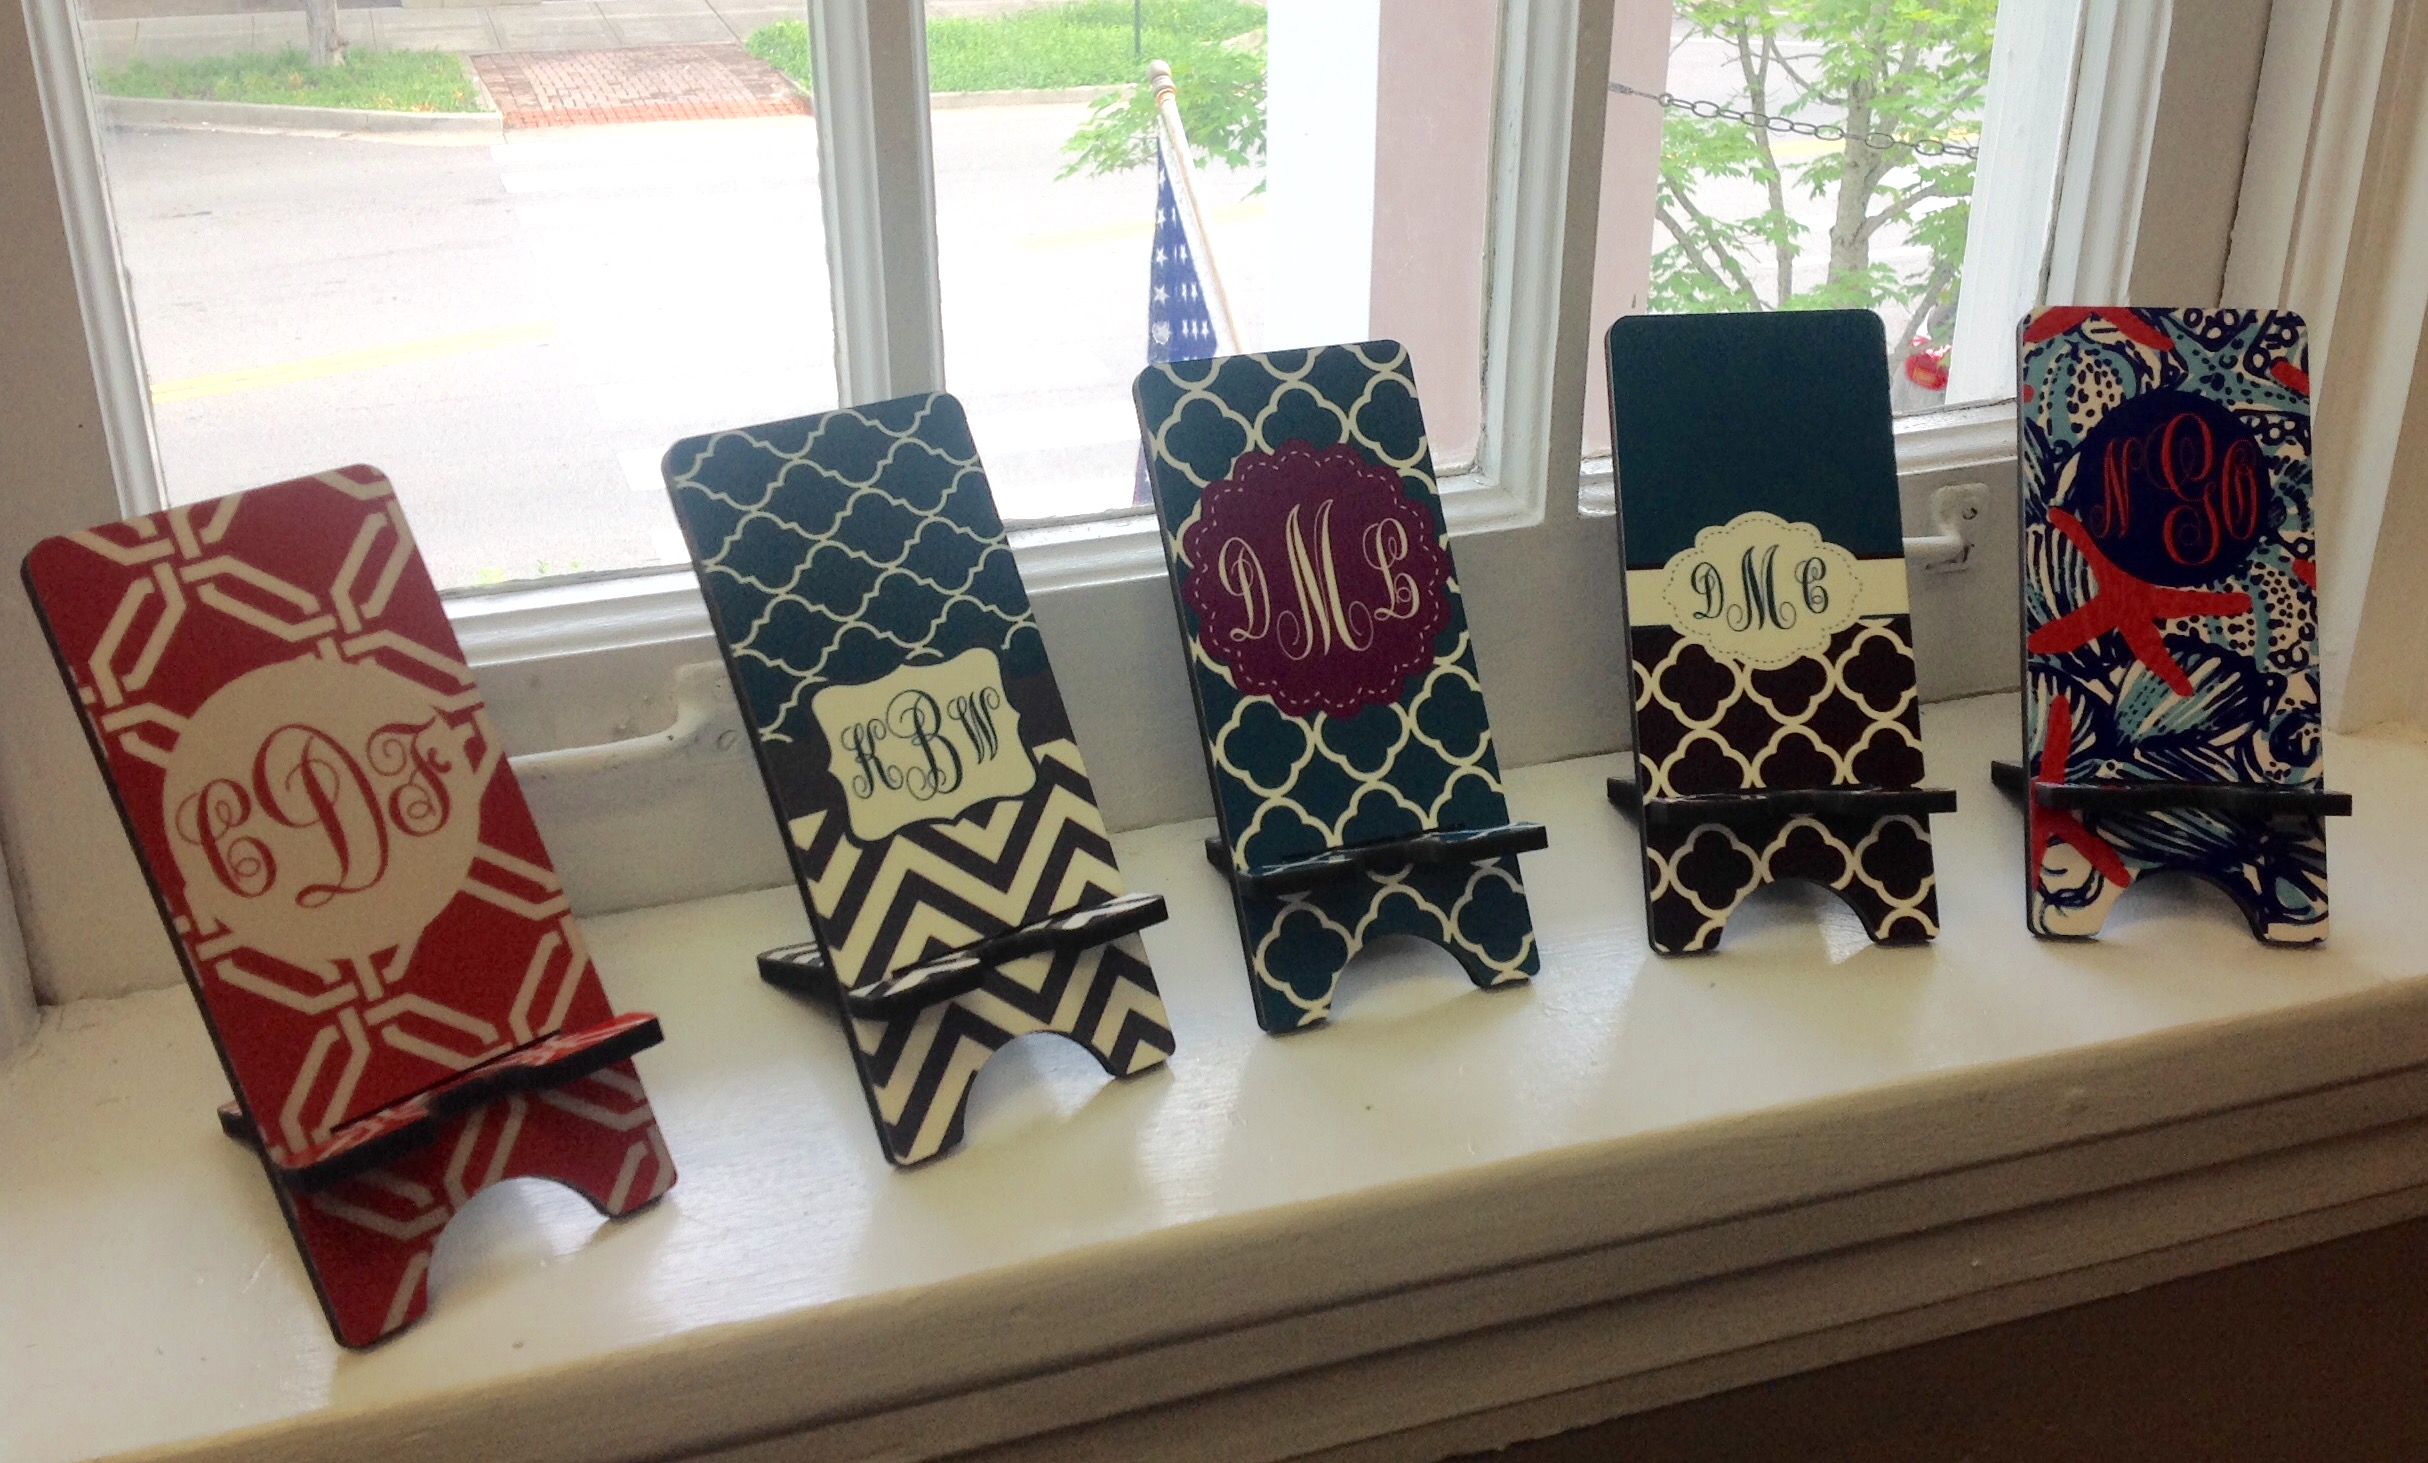 Phone Stands made with sublimation printing